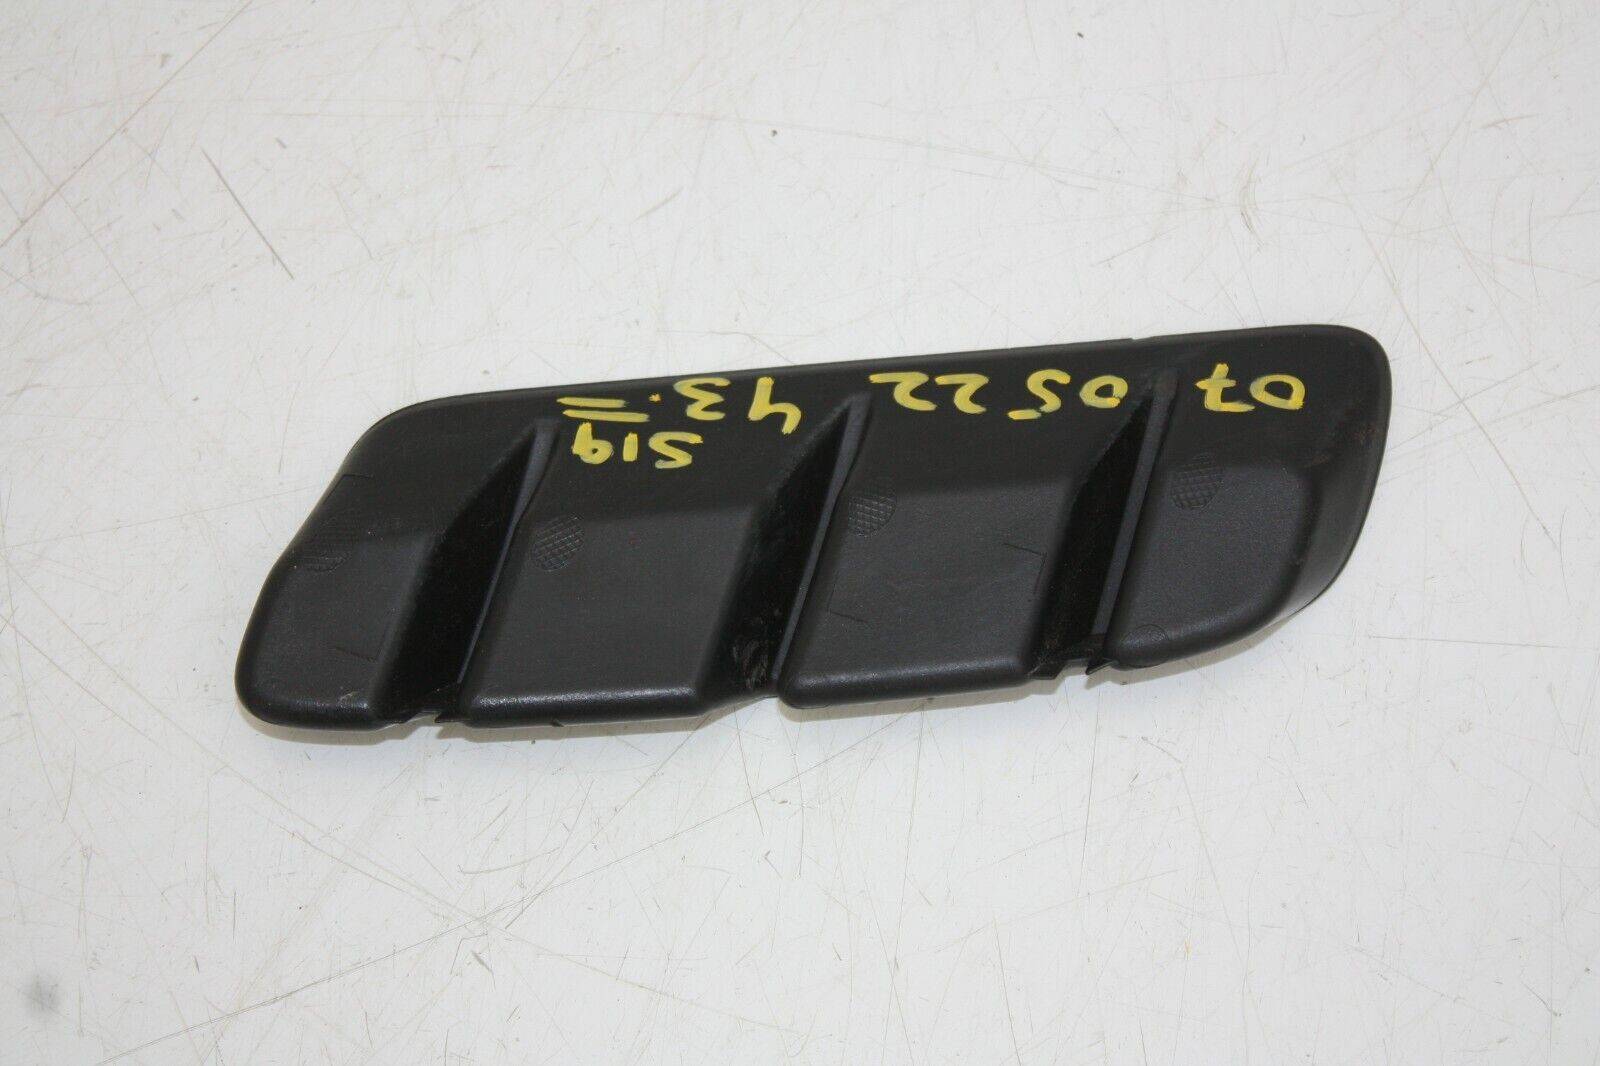 Audi-TT-Coupe-Roadster-Right-Side-Air-Outlet-Trim-8S0807946-Genuine-175869883766-4